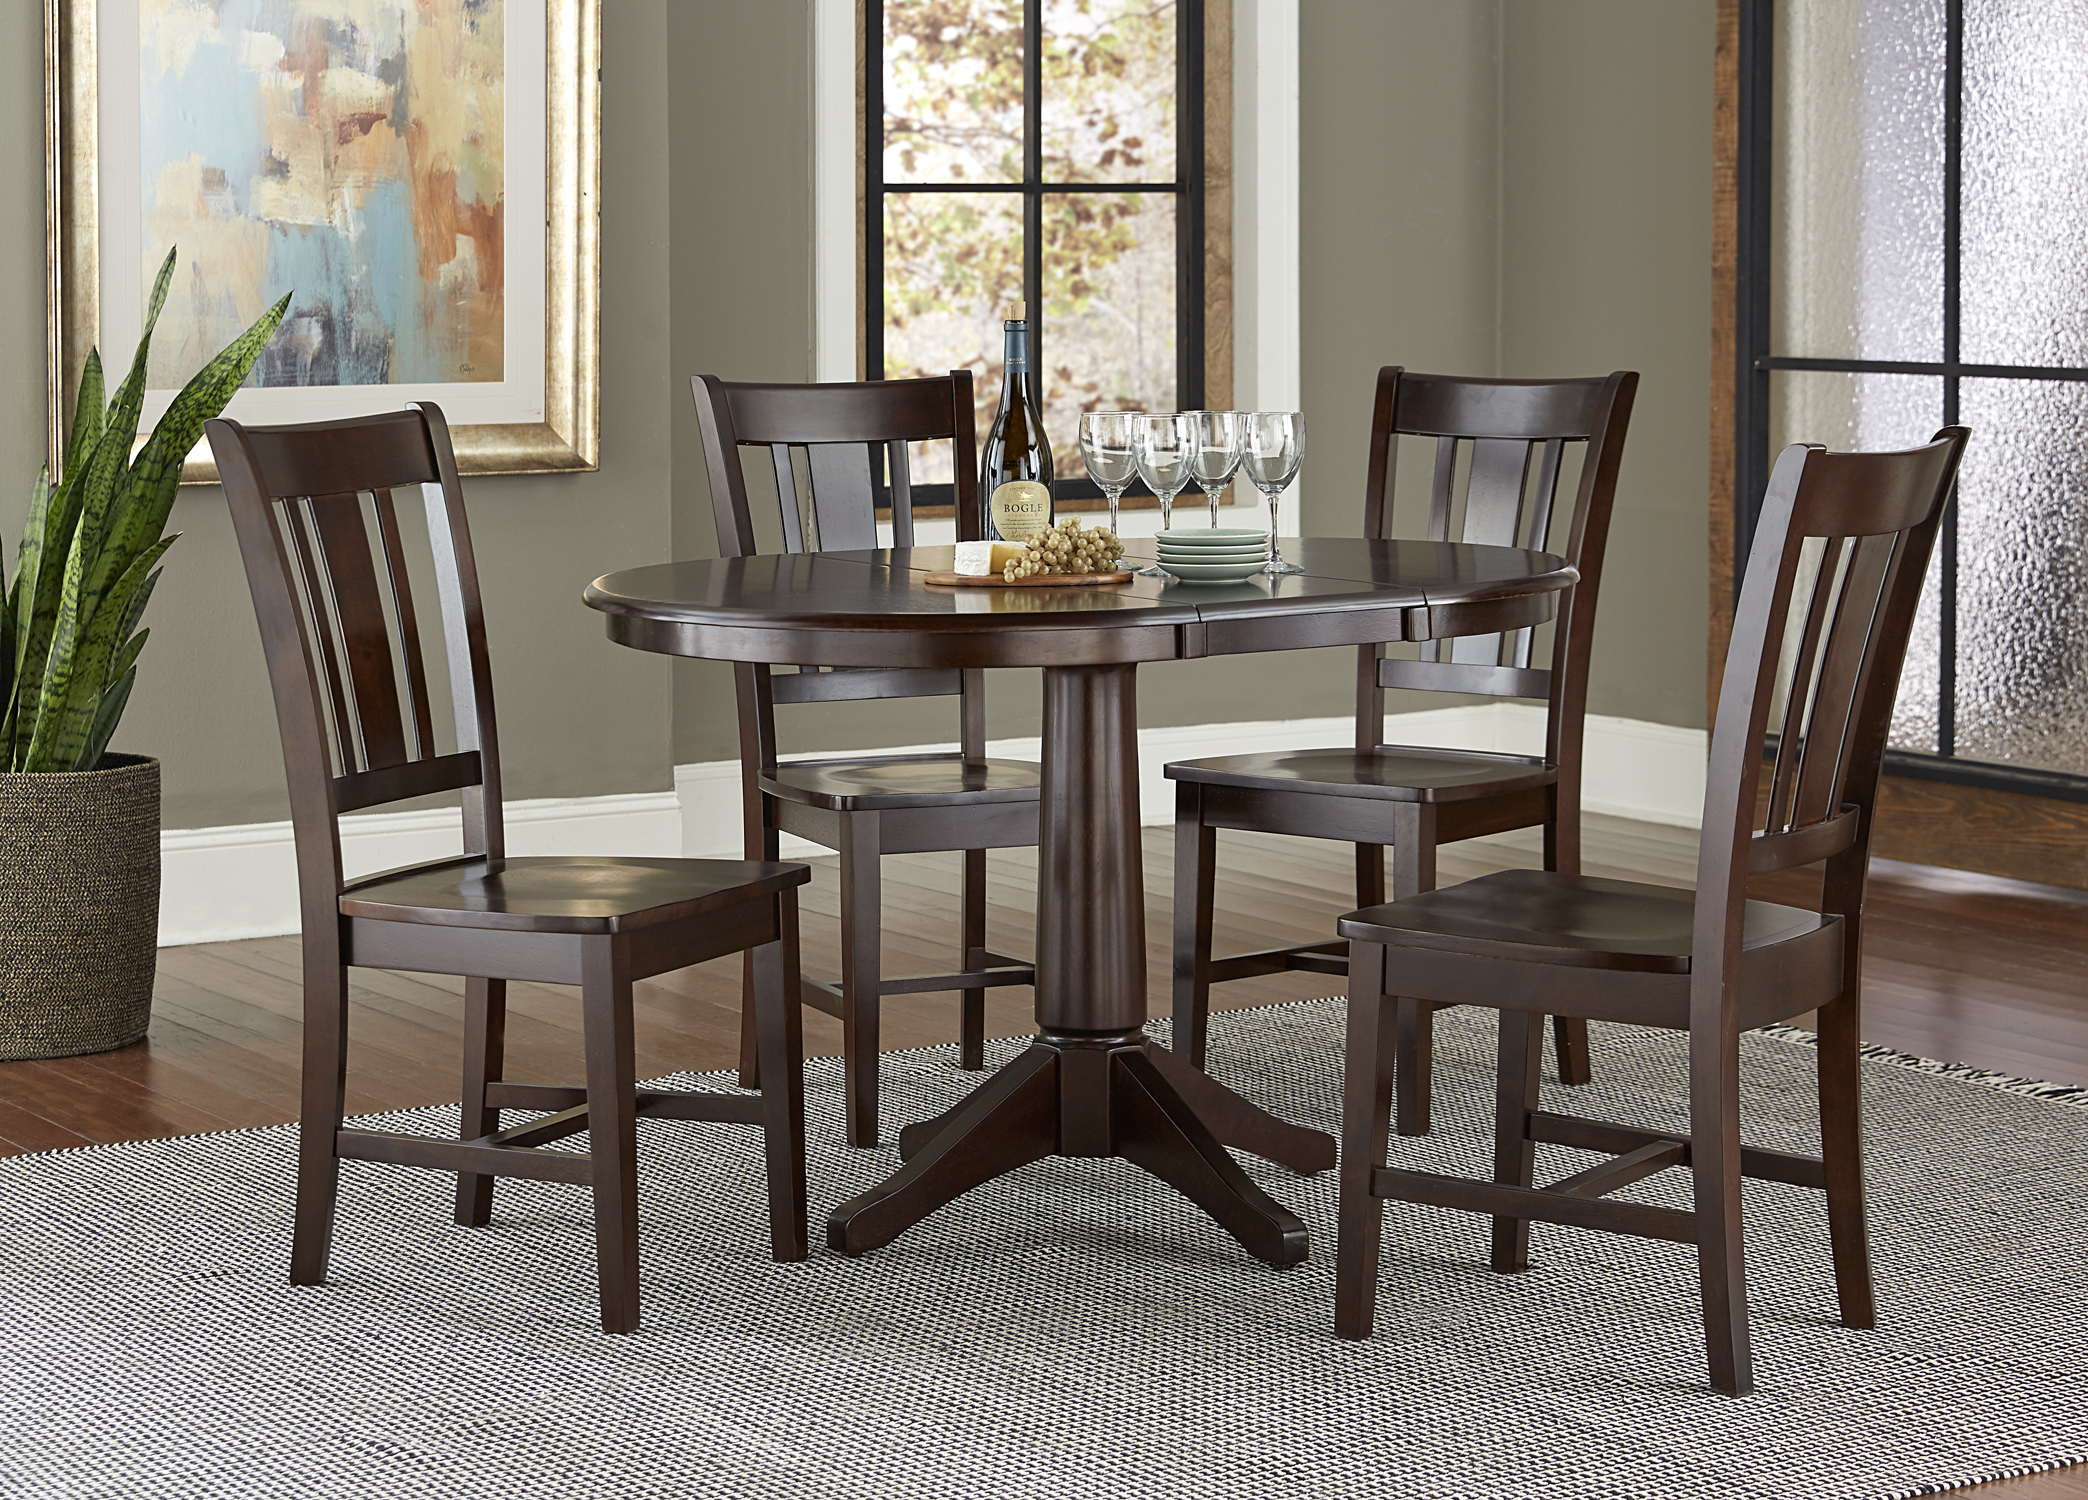 International Concepts K15-36RXT-27B-C10-4 36 in. Round Extension Dining Table with 4 San Remo Chairs - 5 Piece